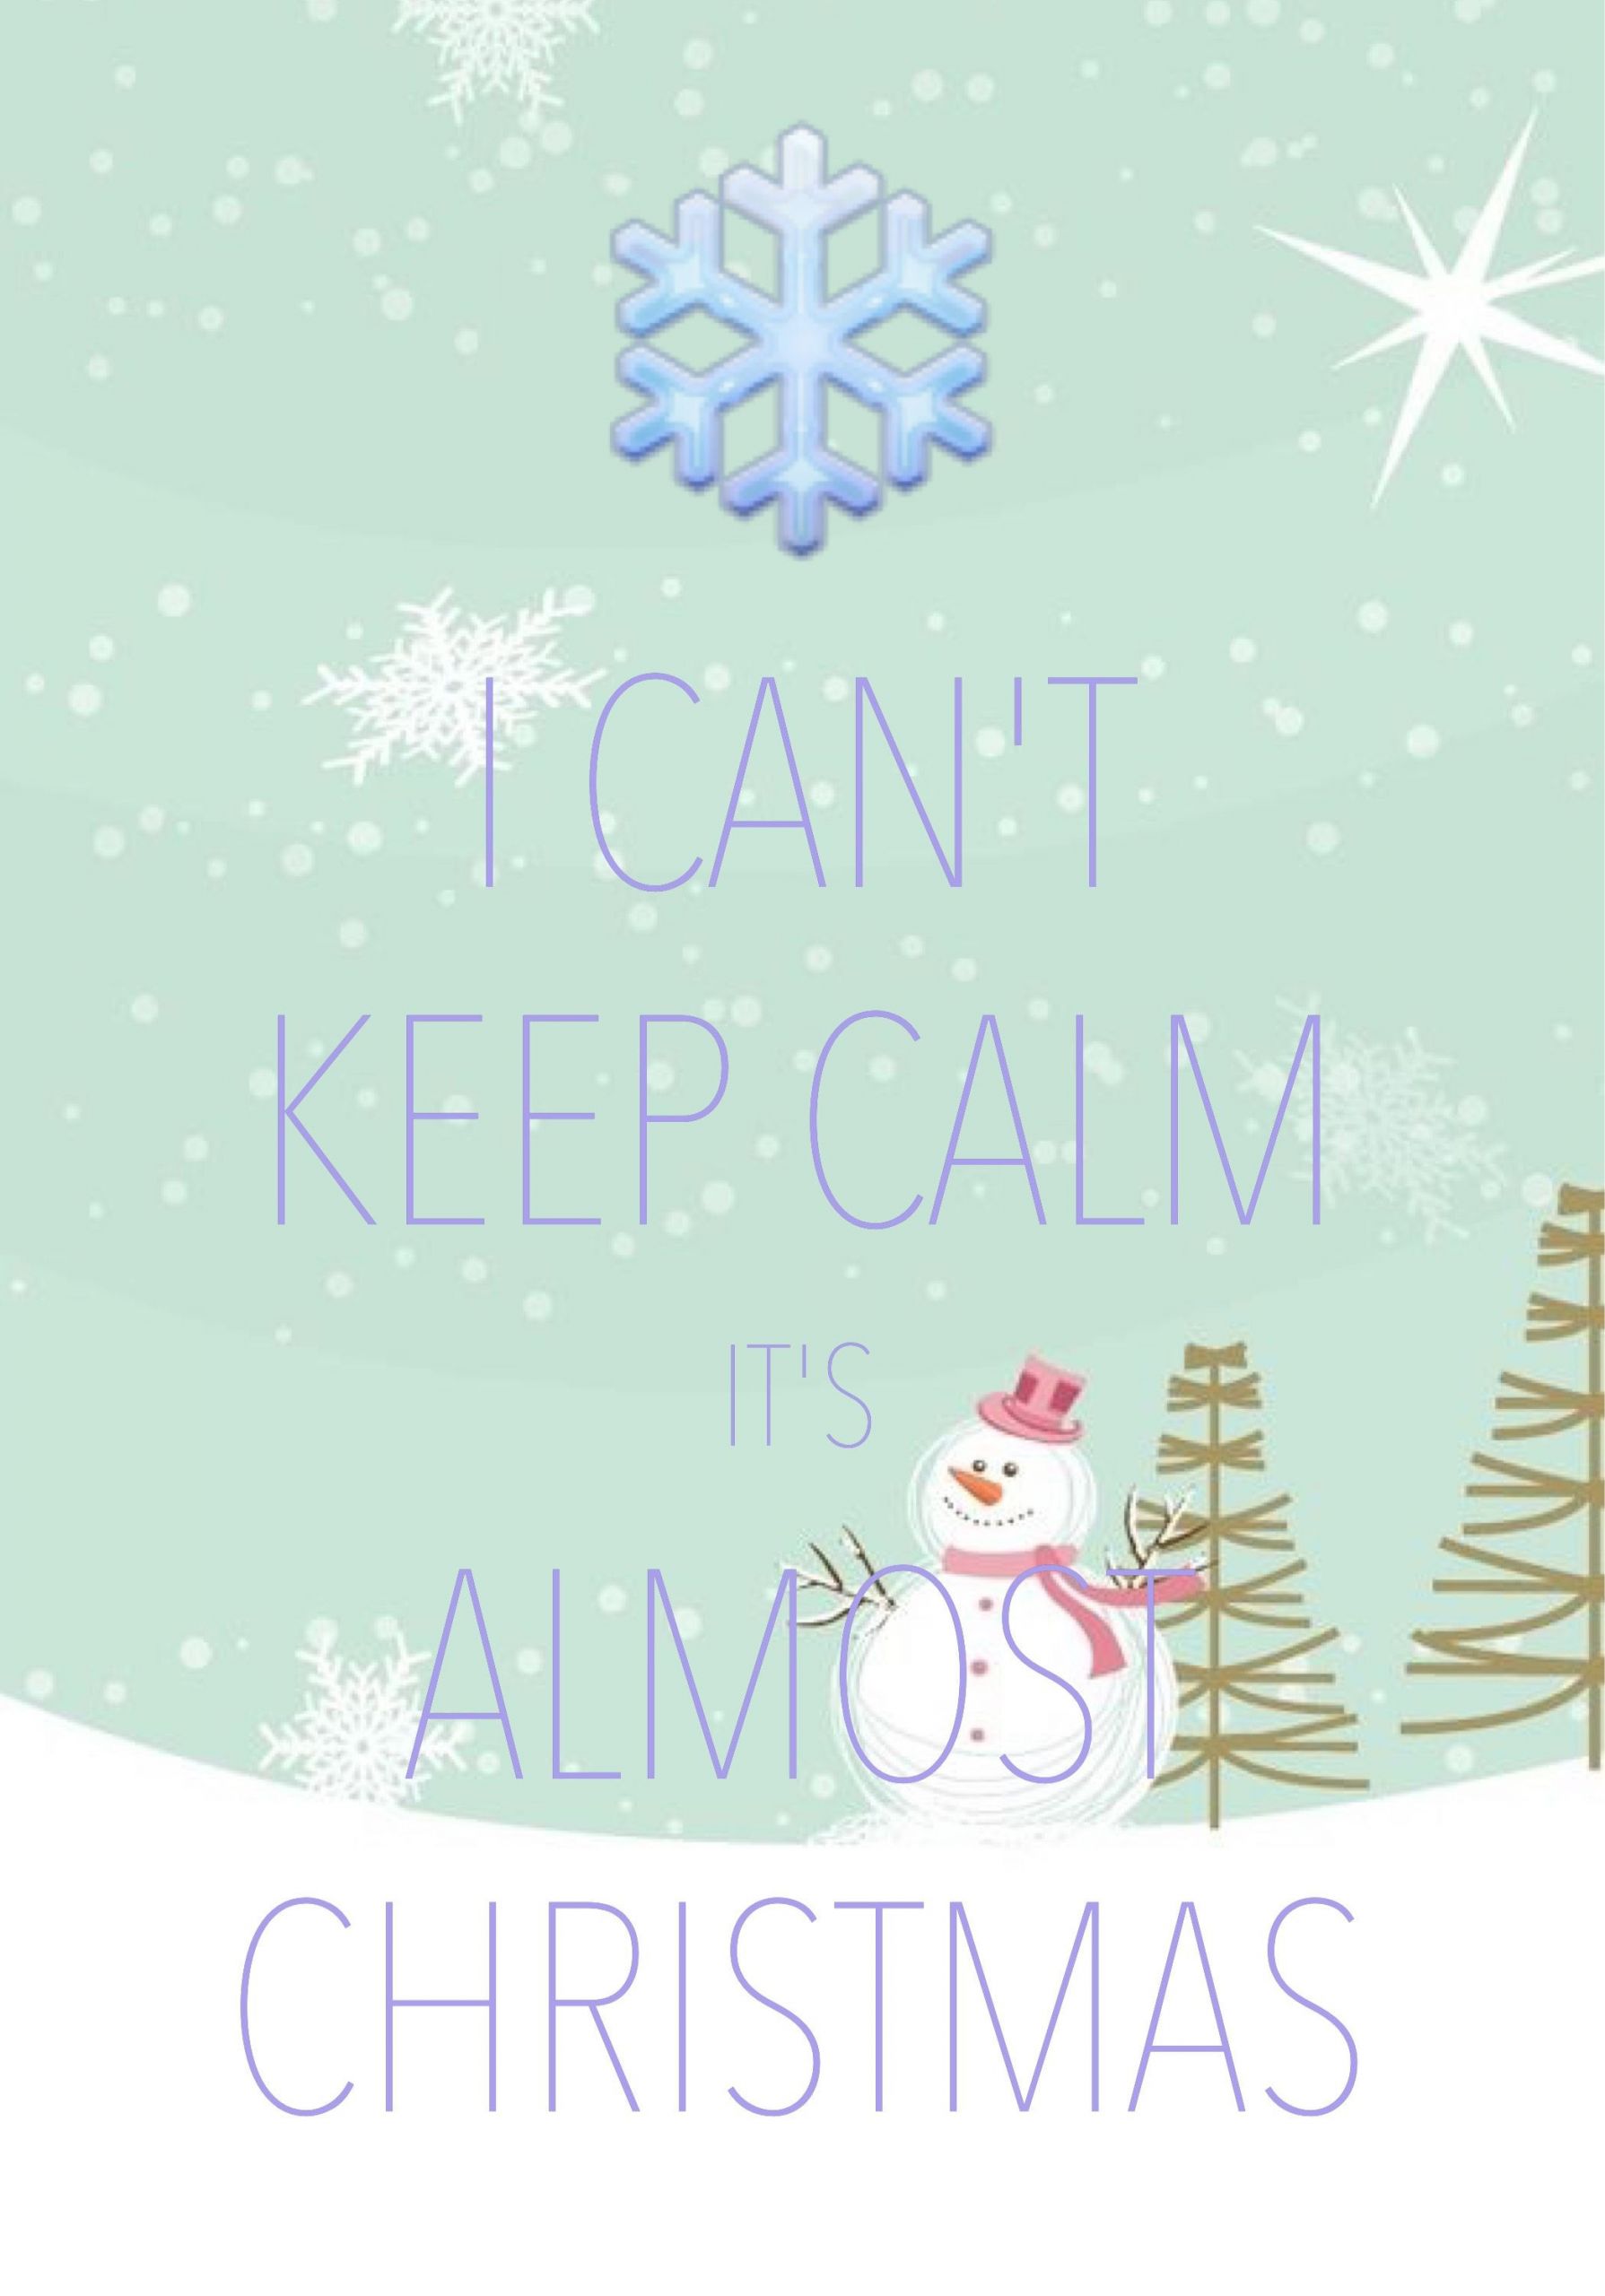 Almost Christmas Movie Quotes
 i can t keep calm it s almost Christmas created with